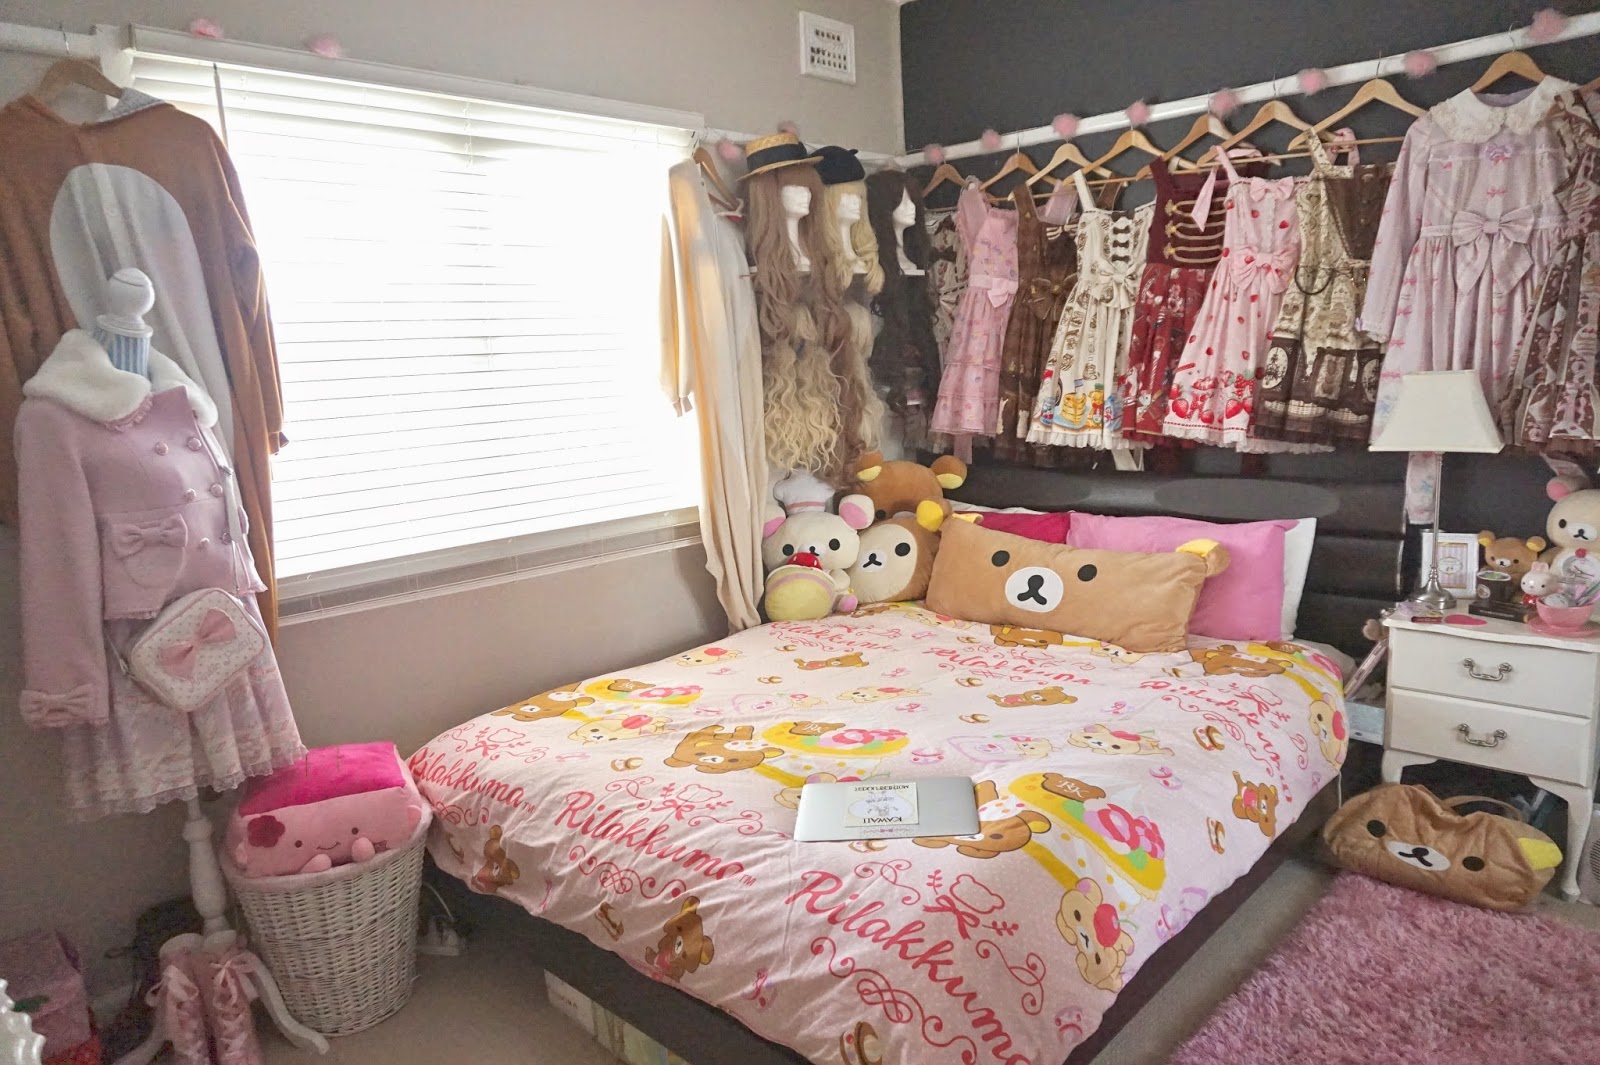 Milkyfawn - A lolita blog.: Welcome to my bedroom!